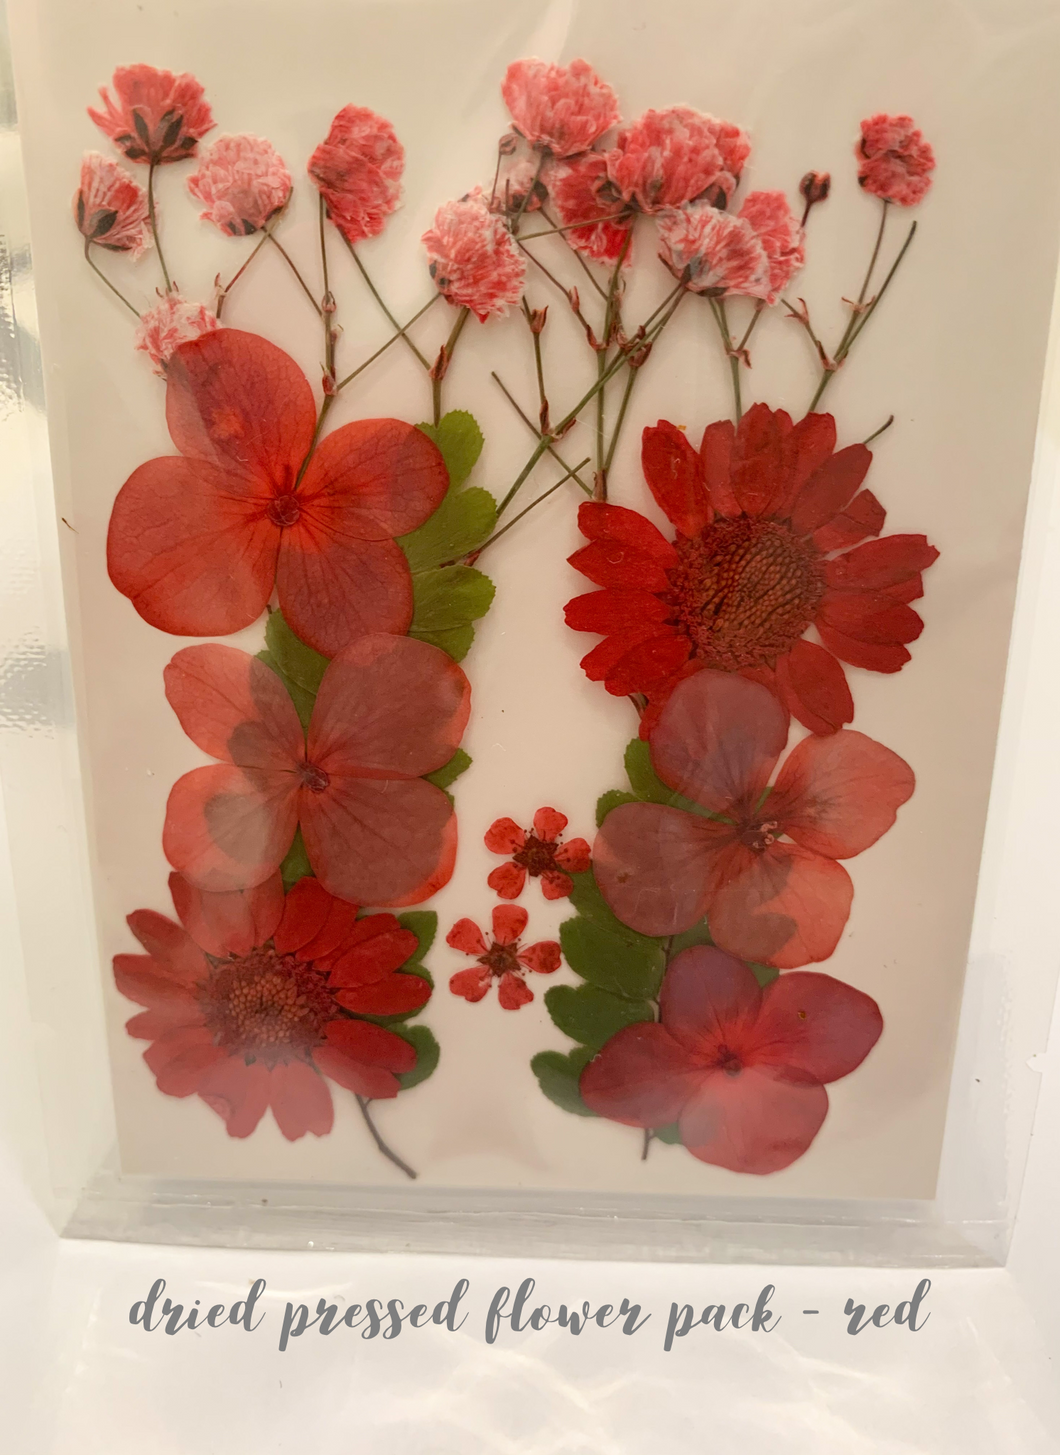 Small Dried Pressed Flower Pack - Red